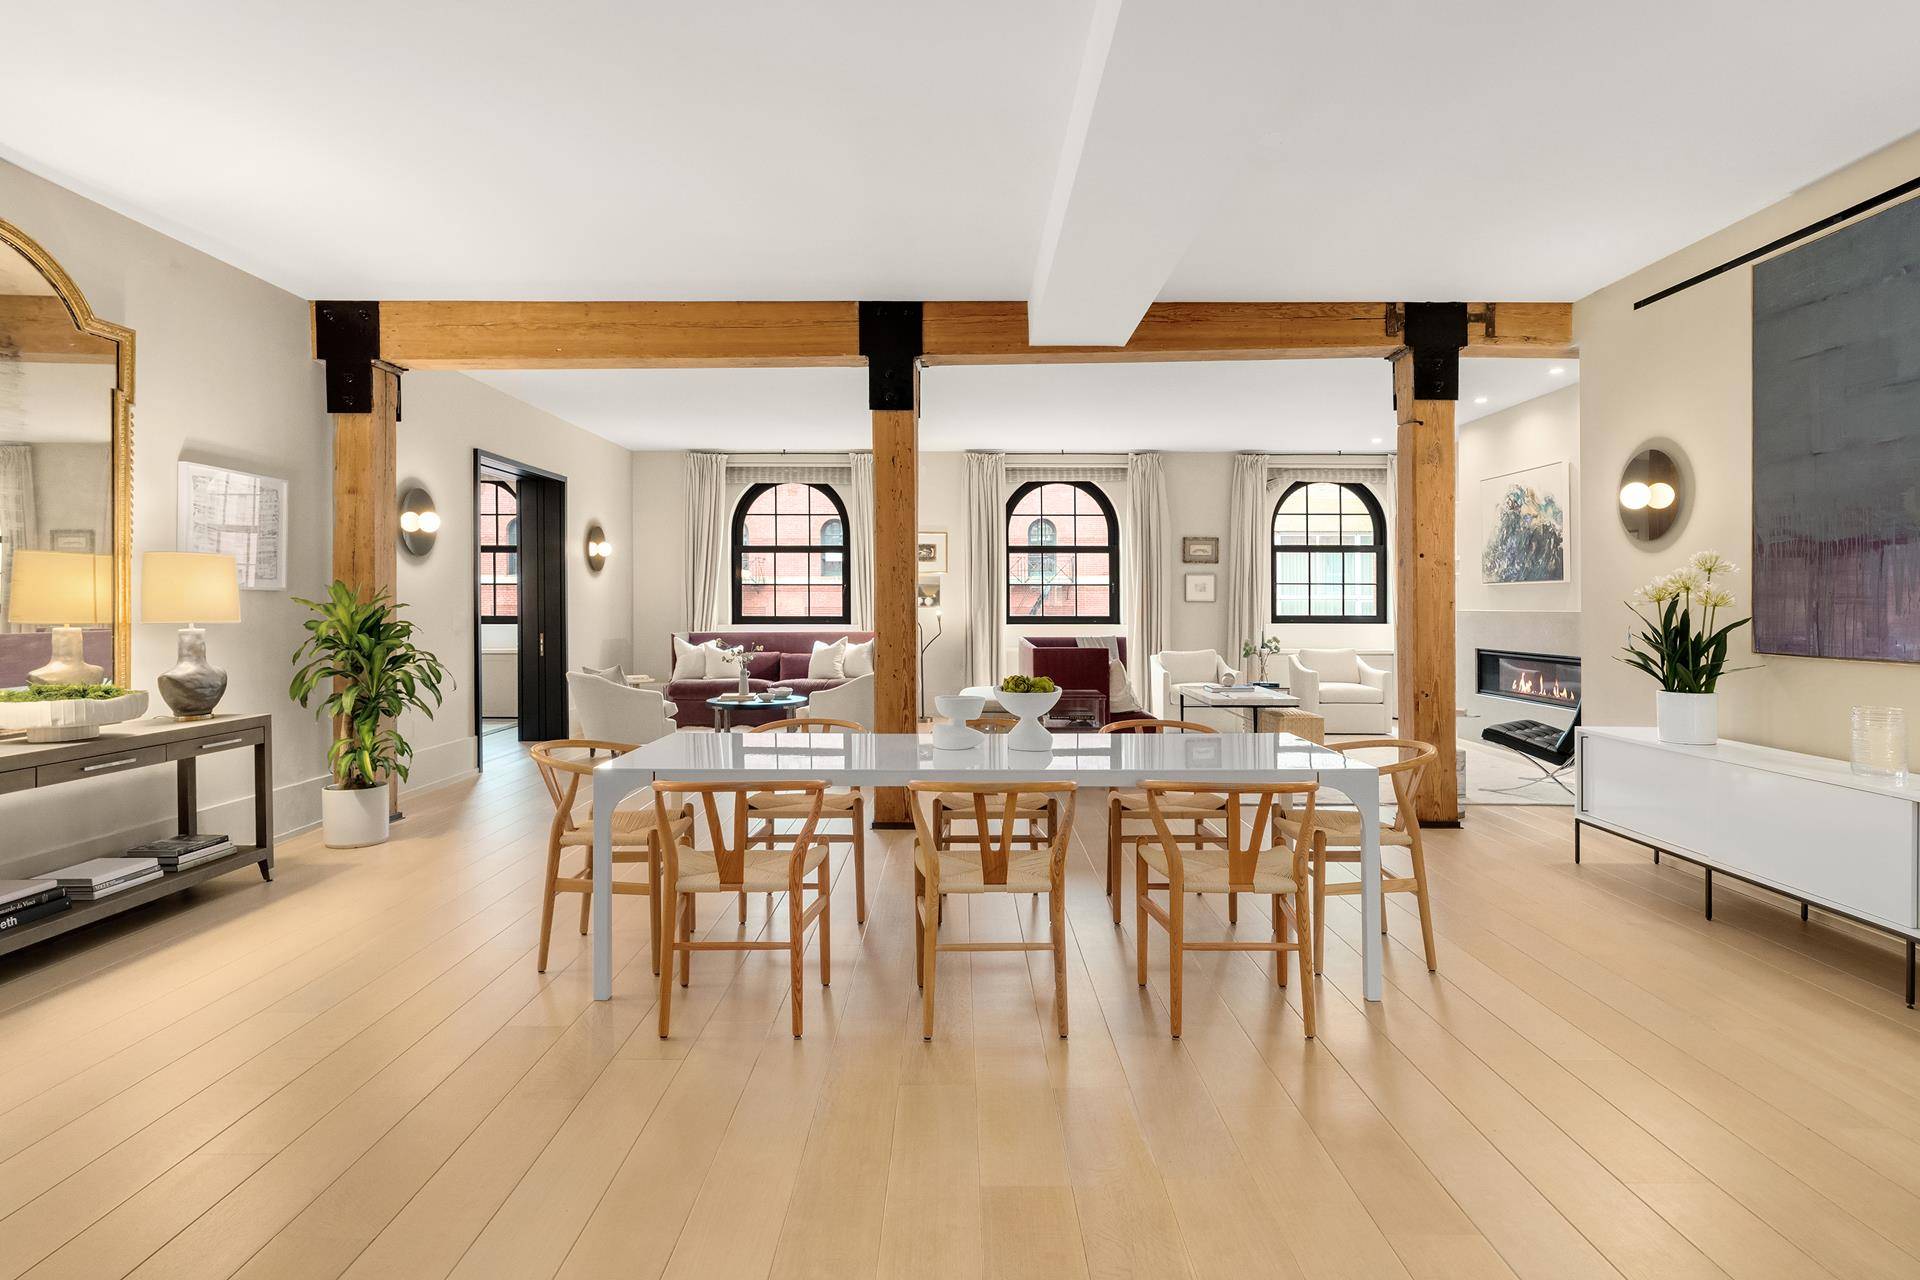 The epitome of luxurious loft living in Tribeca's most coveted landmarked condominium 443 Greenwich Street.